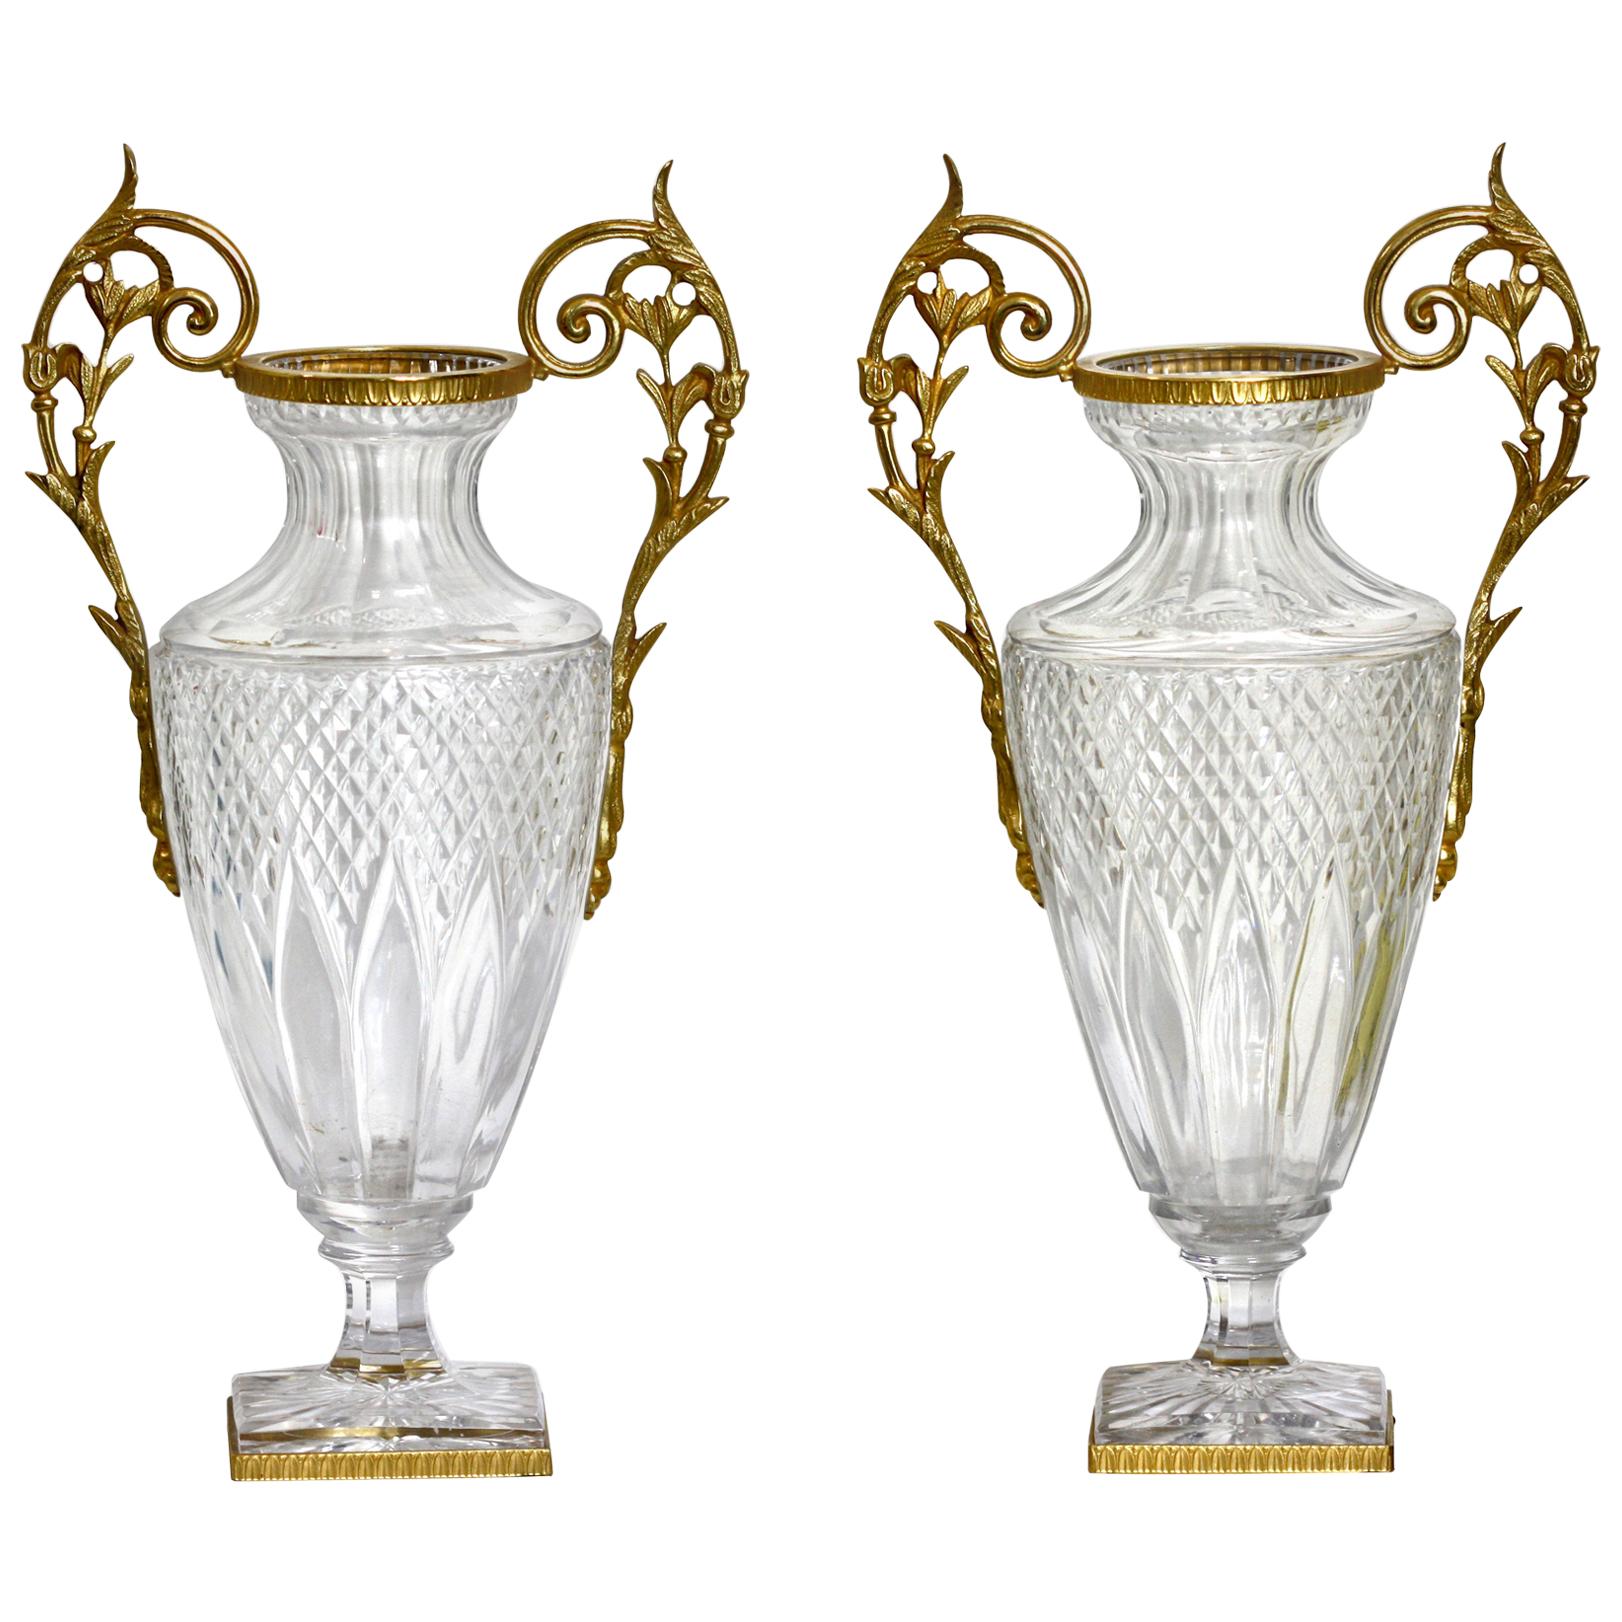 Pair of Empire Style Gilt-Bronze Mounted Cut Glass Urns For Sale